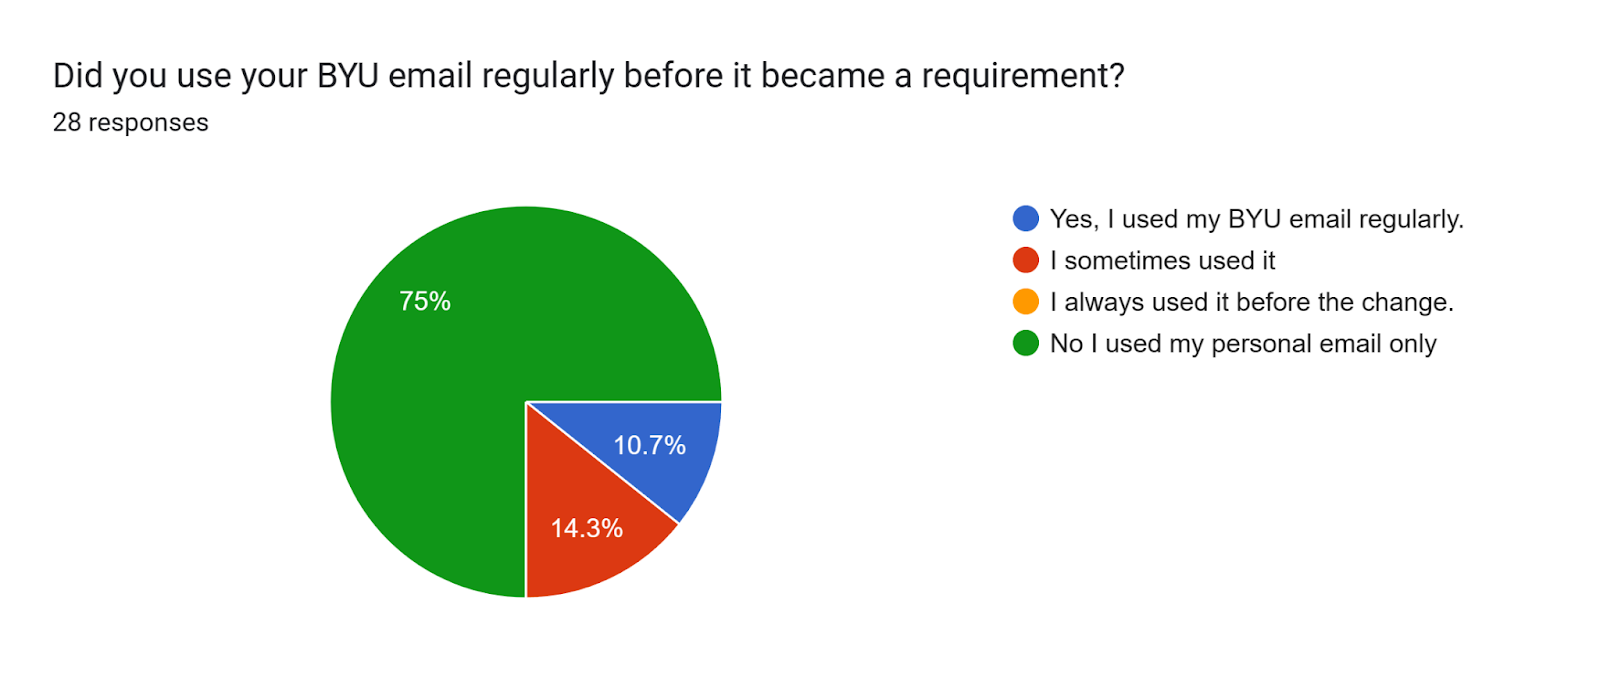 Forms response chart. Question title: Did you use your BYU email regularly before it became a requirement?. Number of responses: 28 responses.